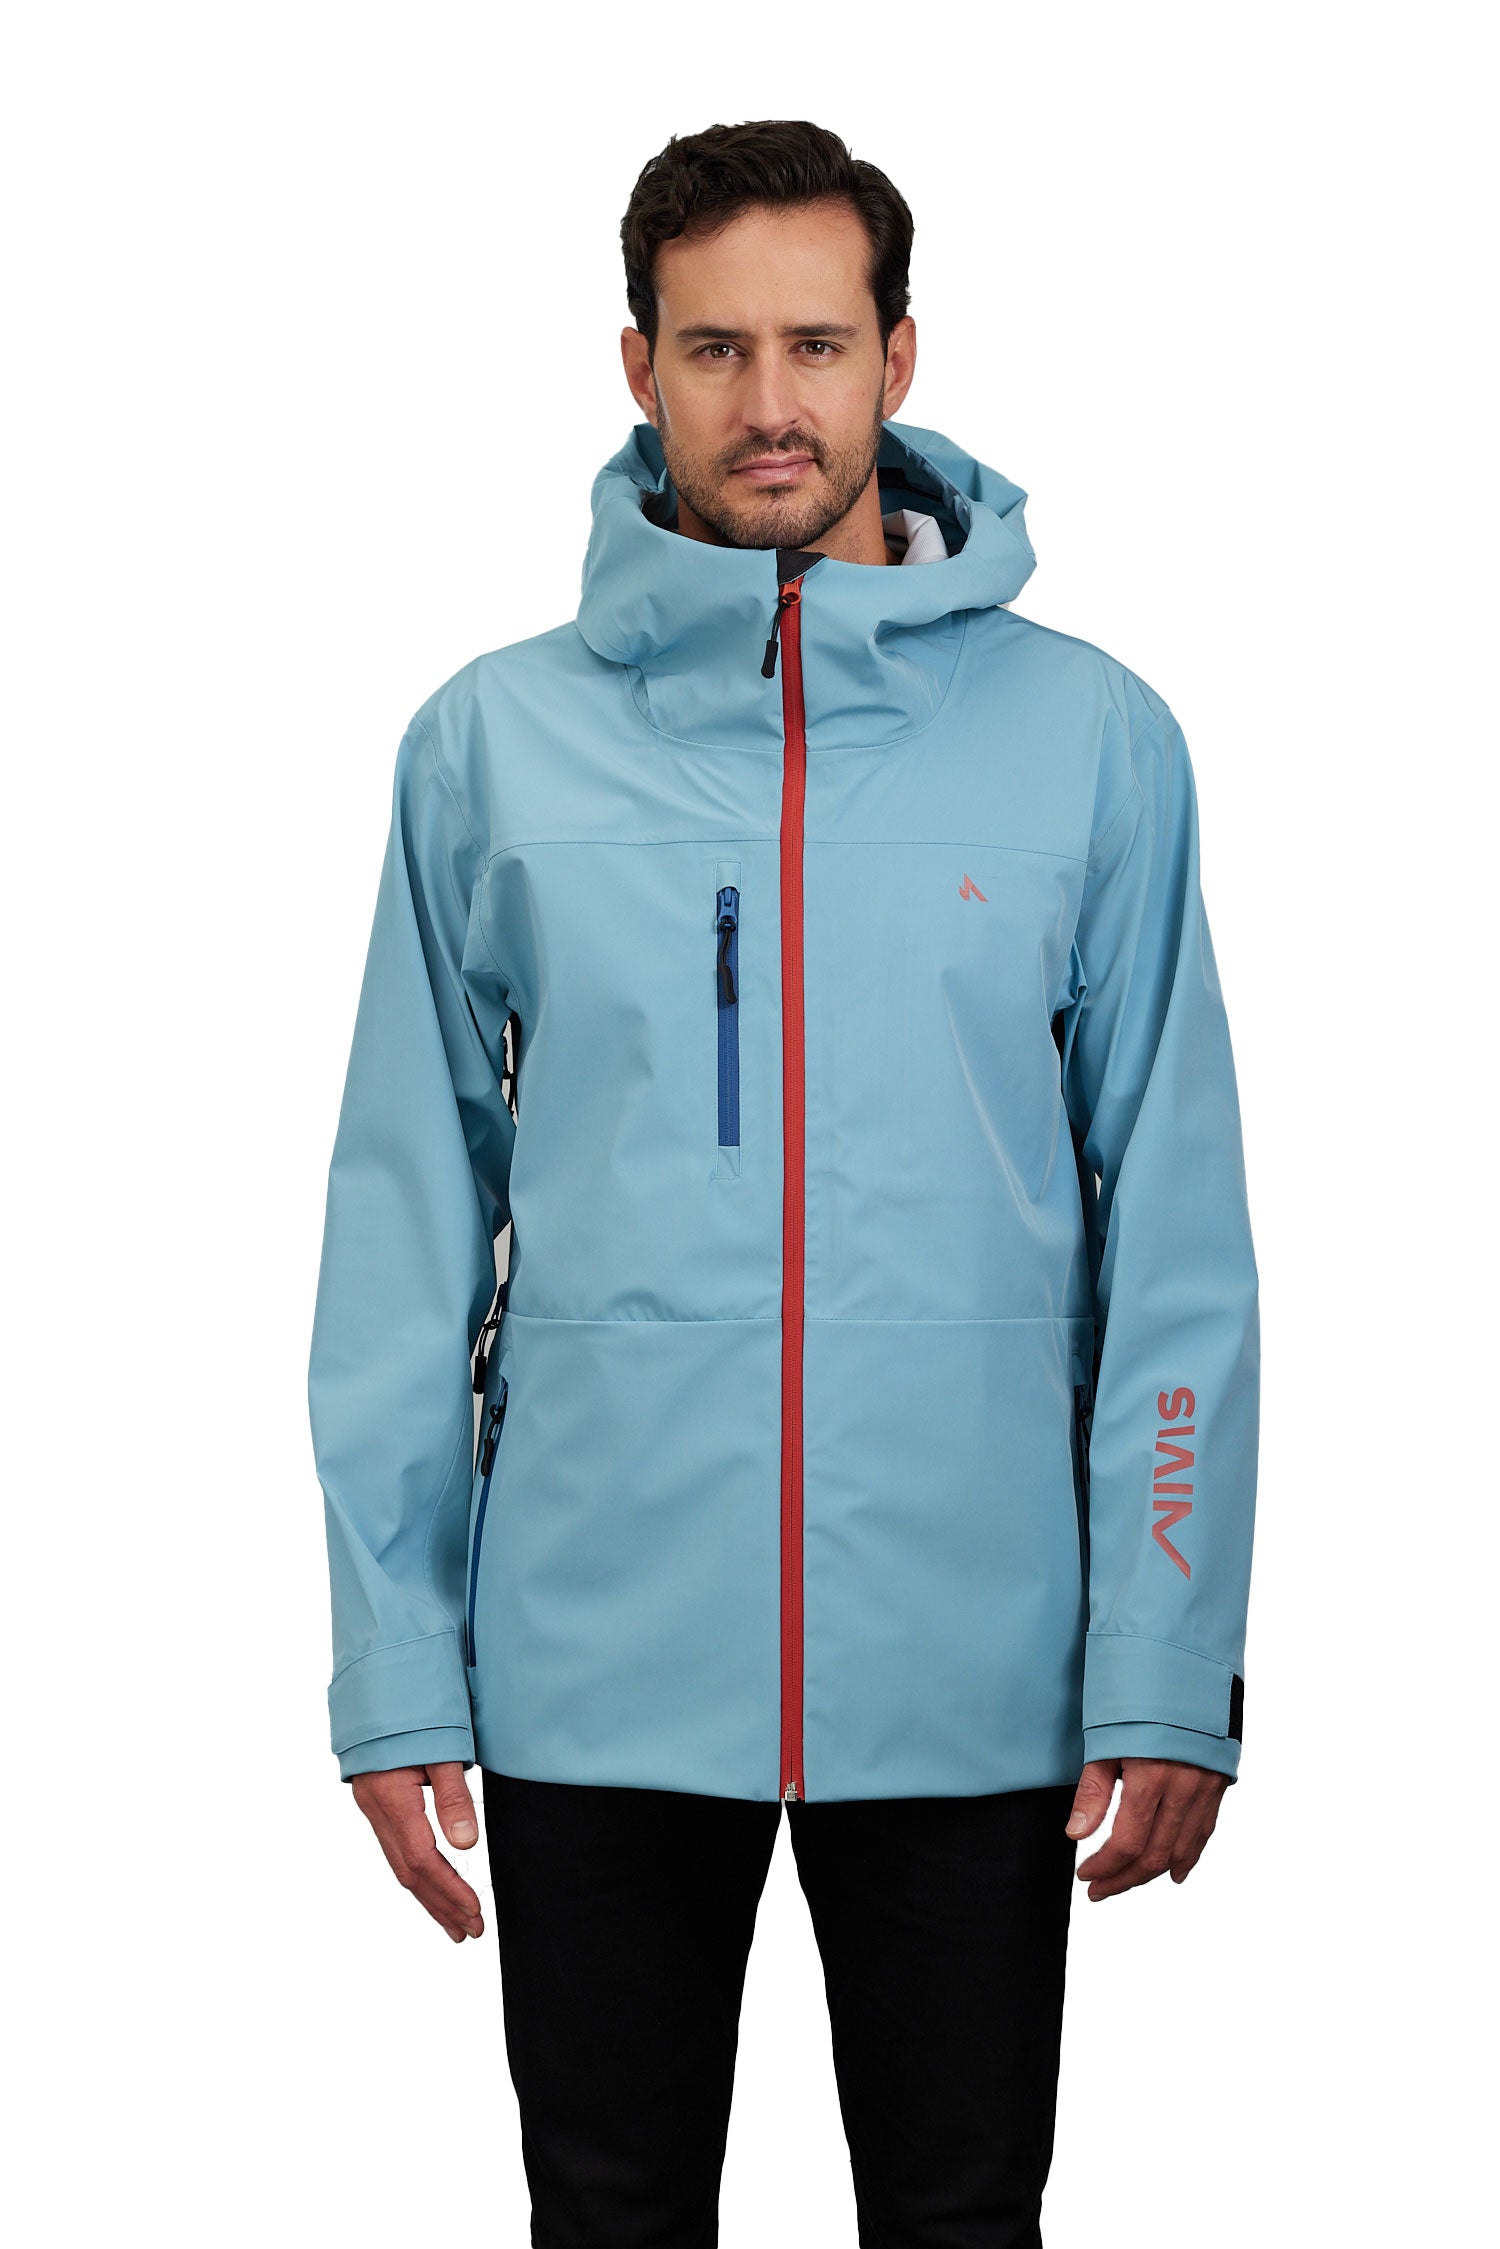 The Protego Shell Jacket in Ice Blue